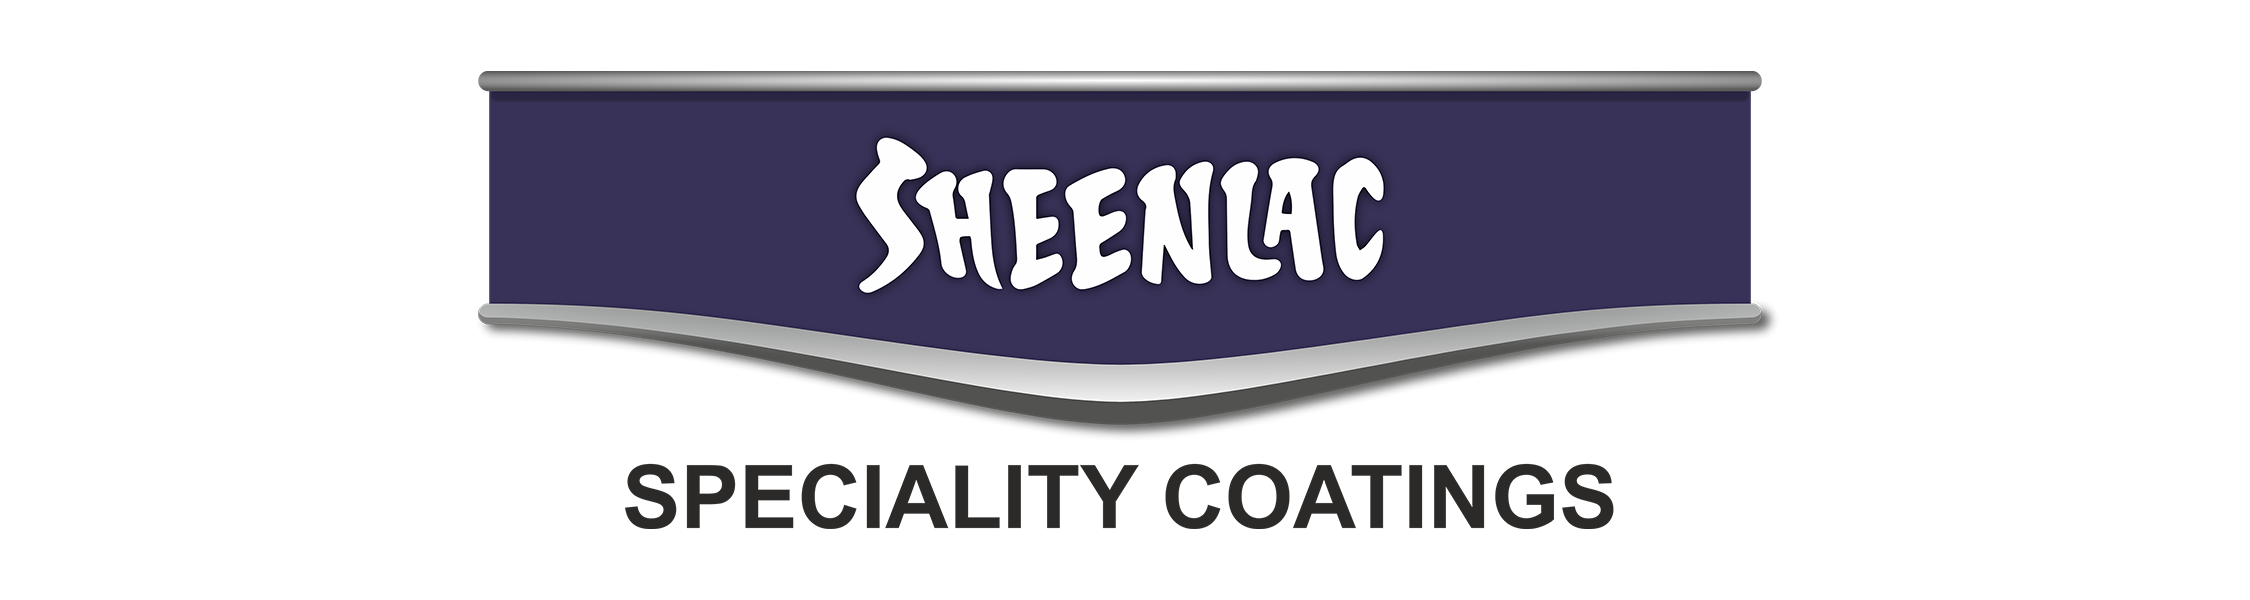 SHEENLAC SPECIALITY COATINGS